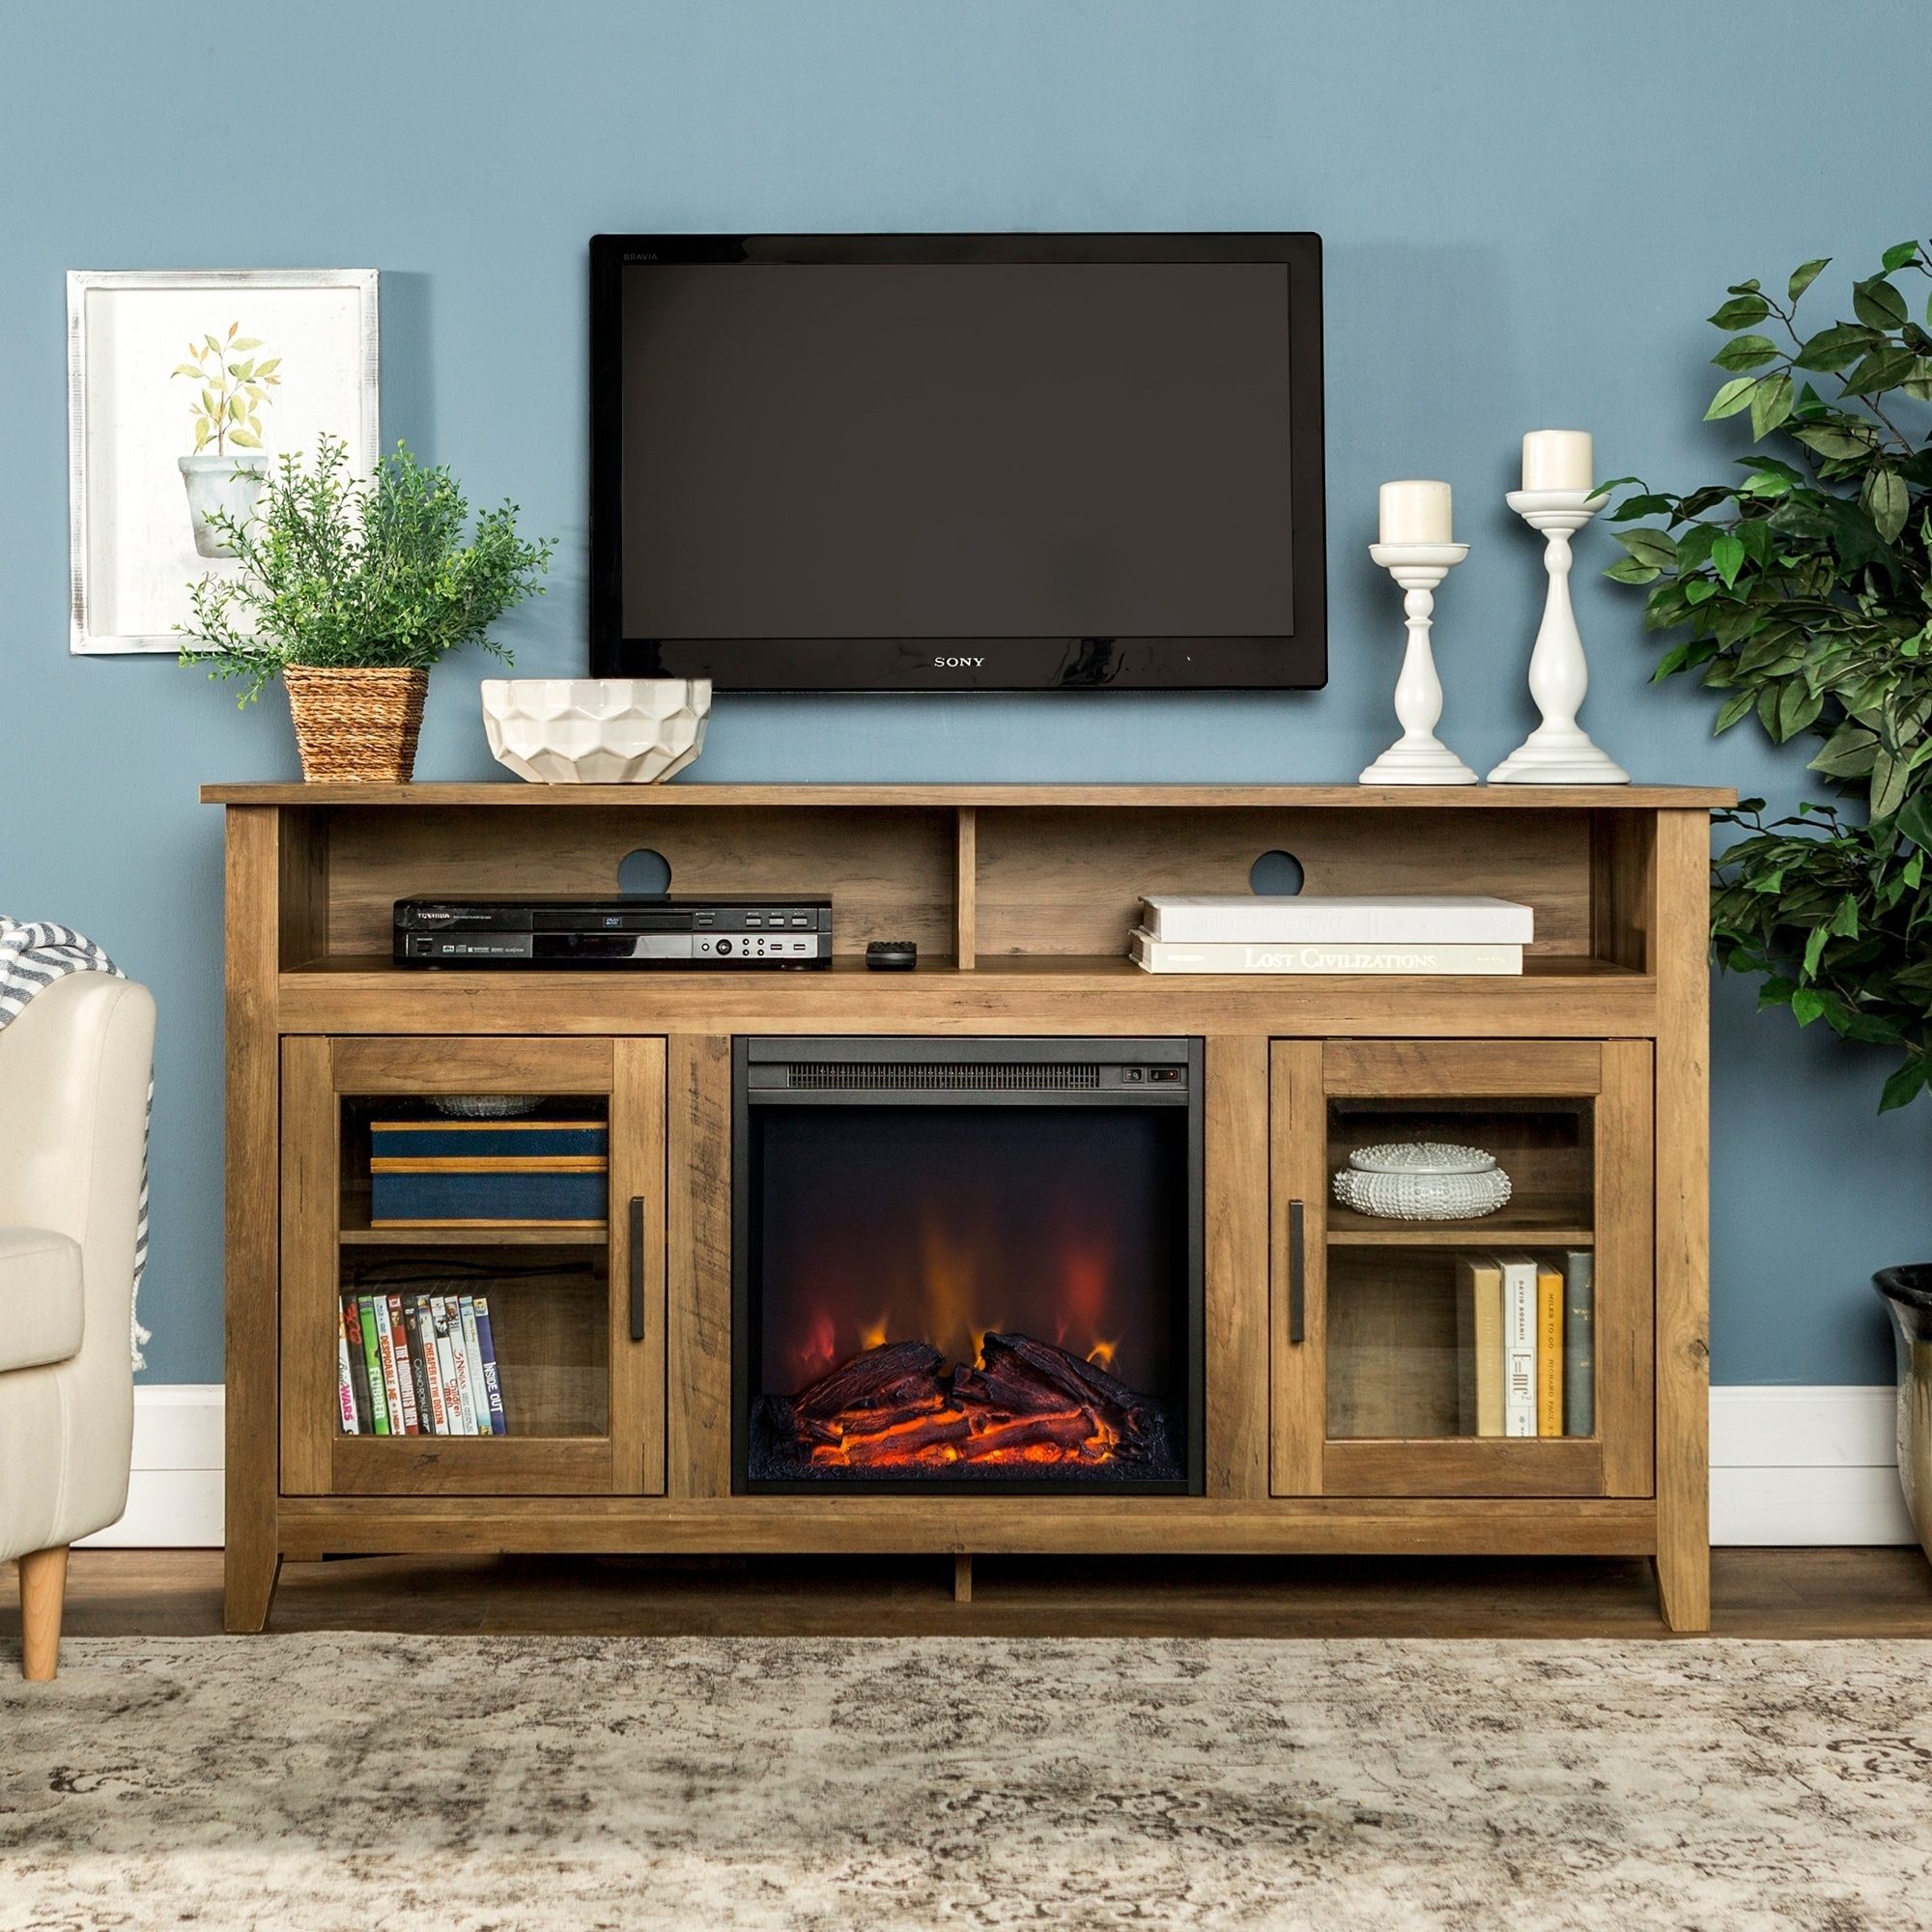 Fireplace Tv Stand Oak | Omeublog Secreto Within Modern Farmhouse Fireplace Credenza Tv Stands Rustic Gray Finish (View 2 of 15)